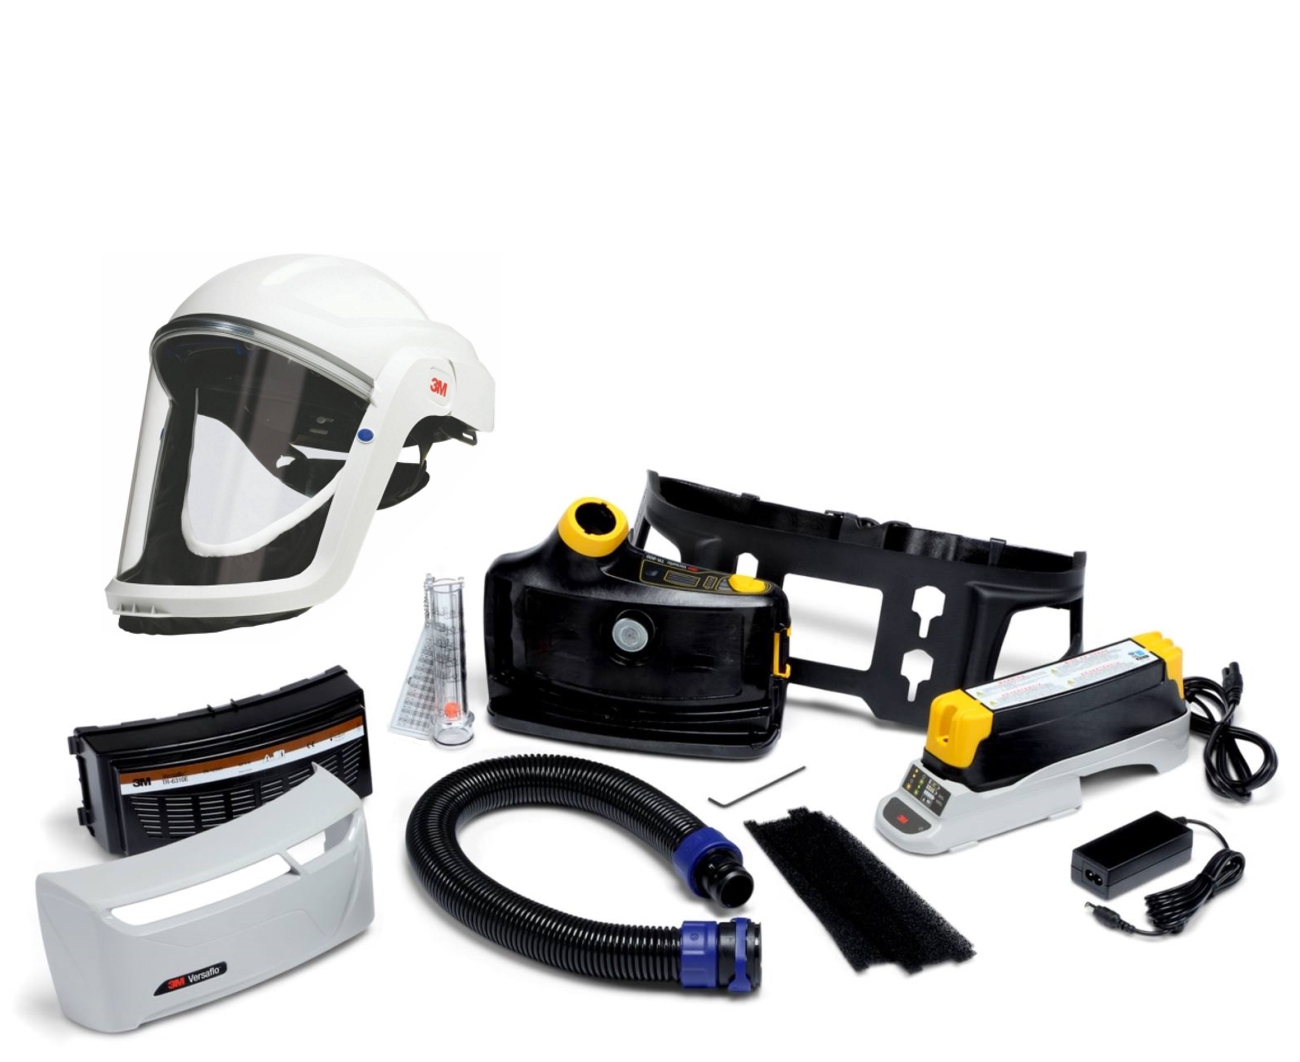 3M TR-819E IS Versaflo starter pack explosion protection incl. TR-802E, accessories and 3M Versaflo Safety helmet M207 with flame-retardant face seal and polycarbonate visor, clear